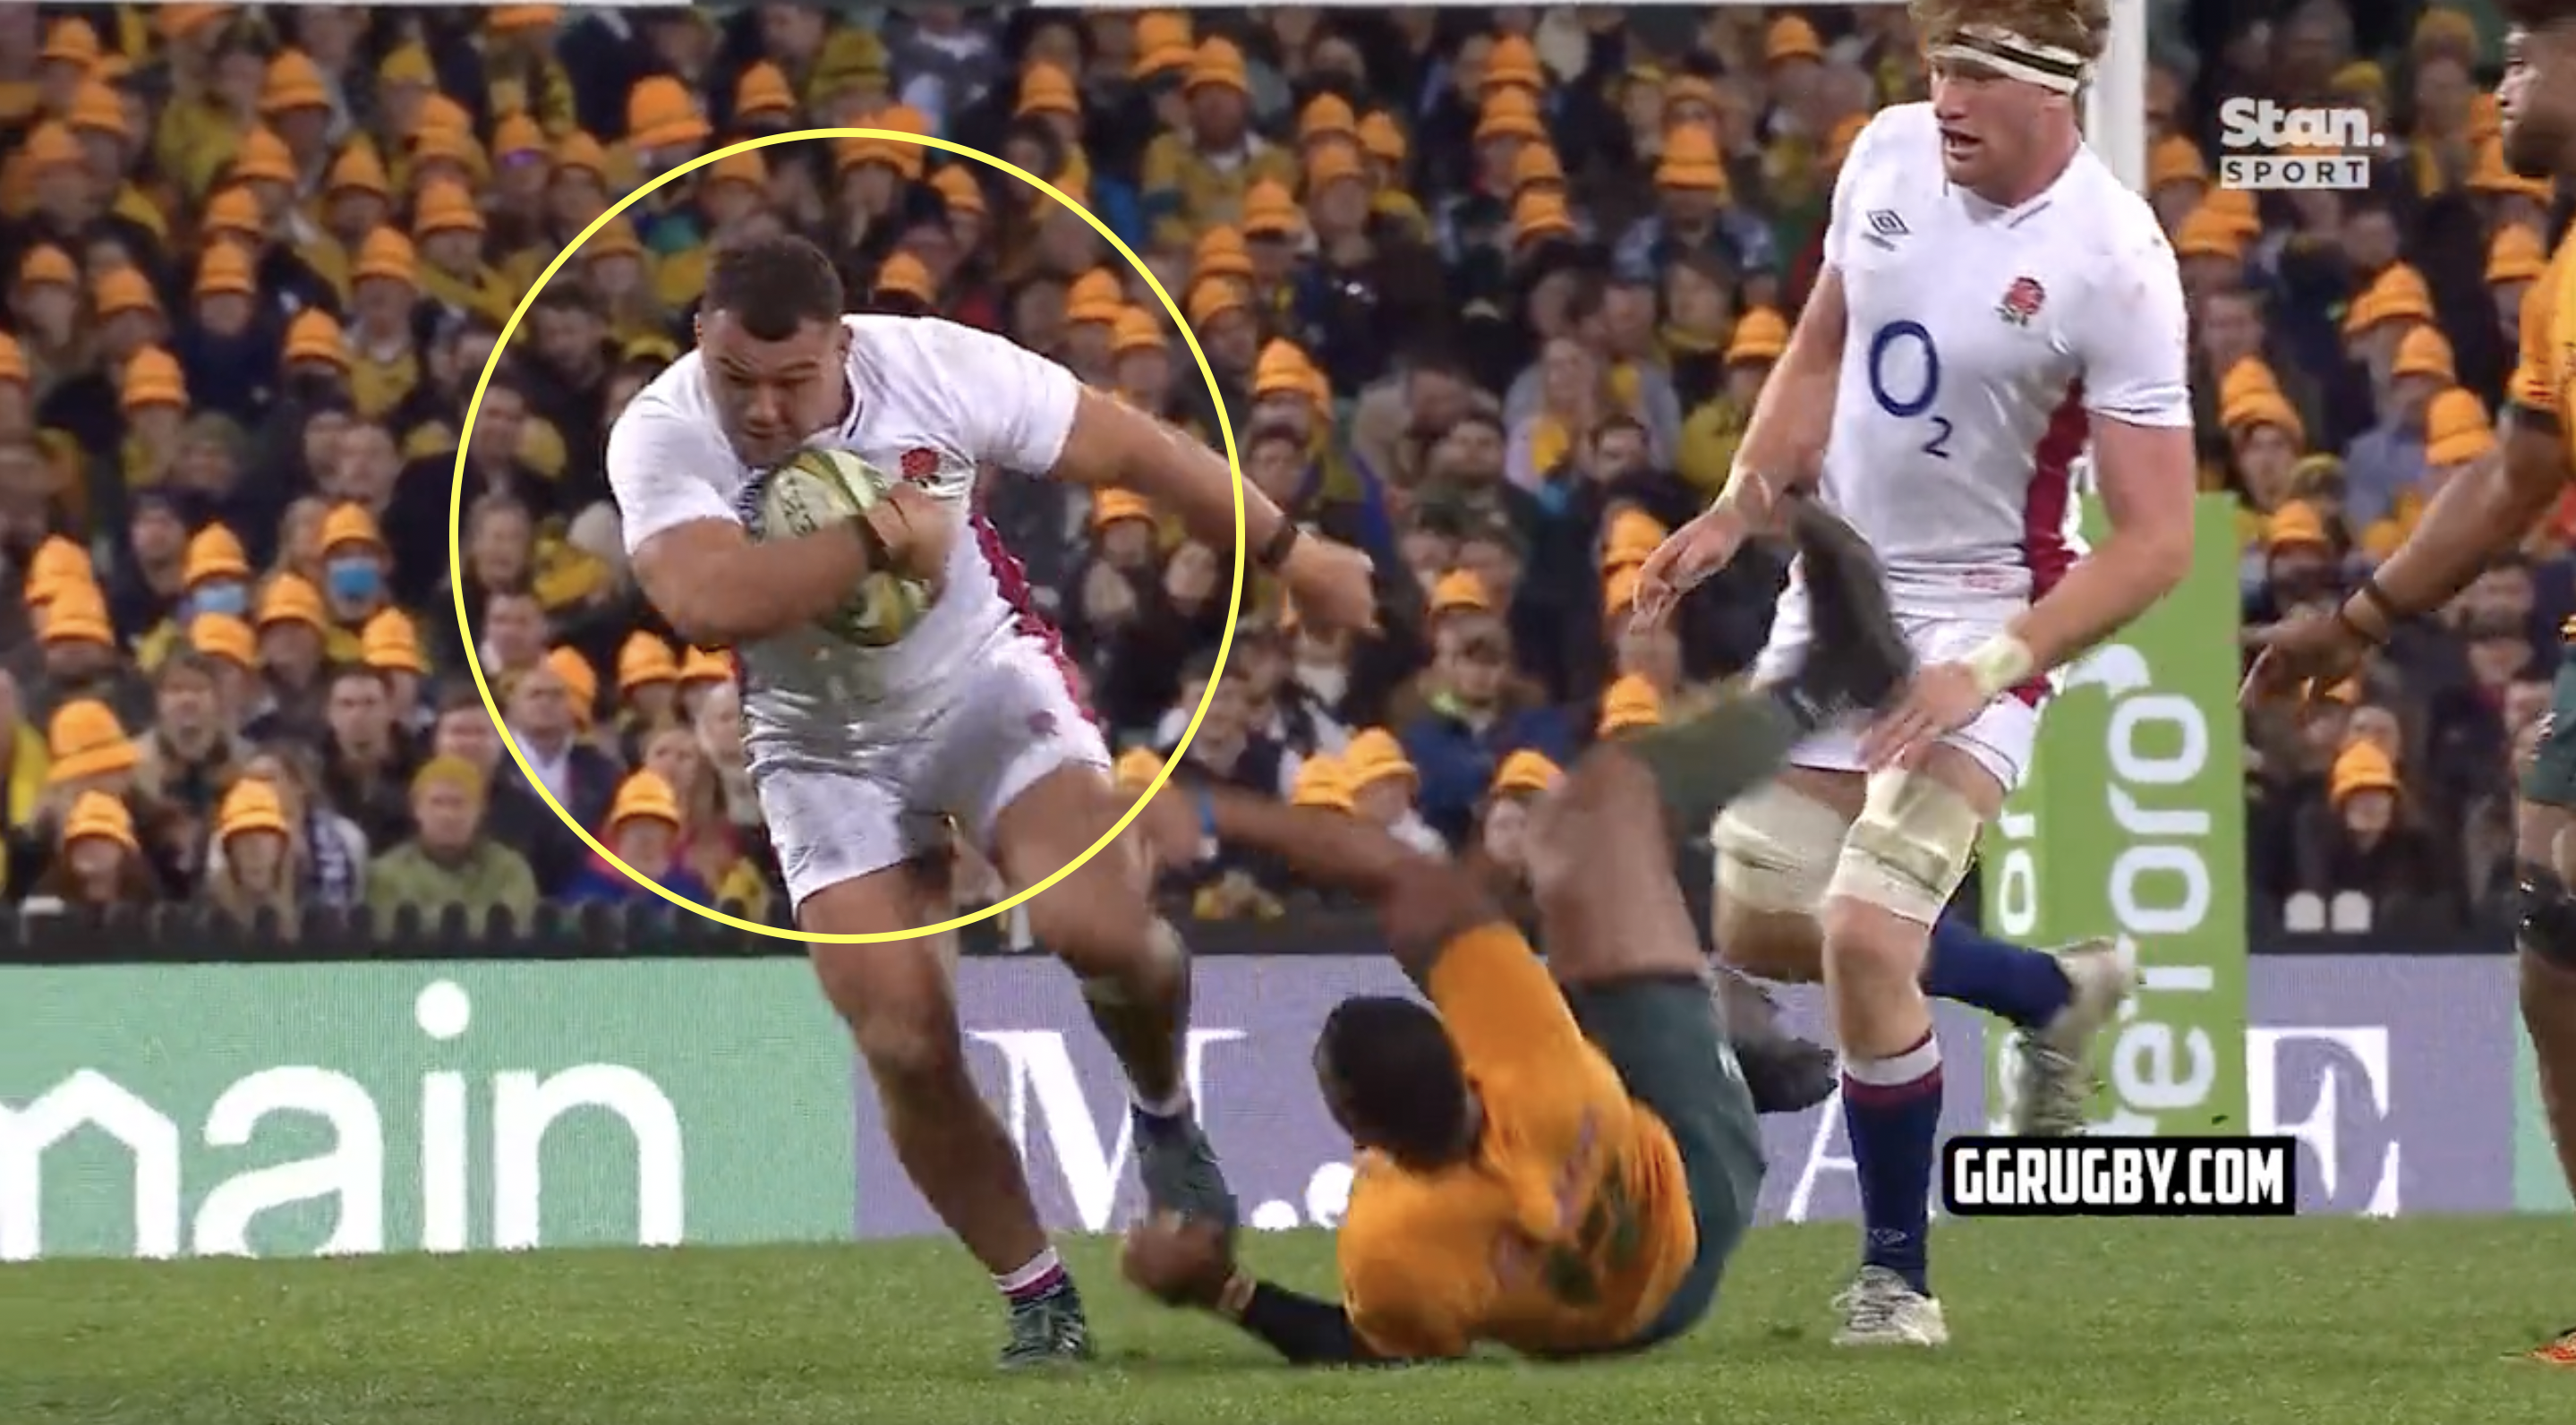 Genge proves he's the hardest man in rugby by swatting away easy red card tackle